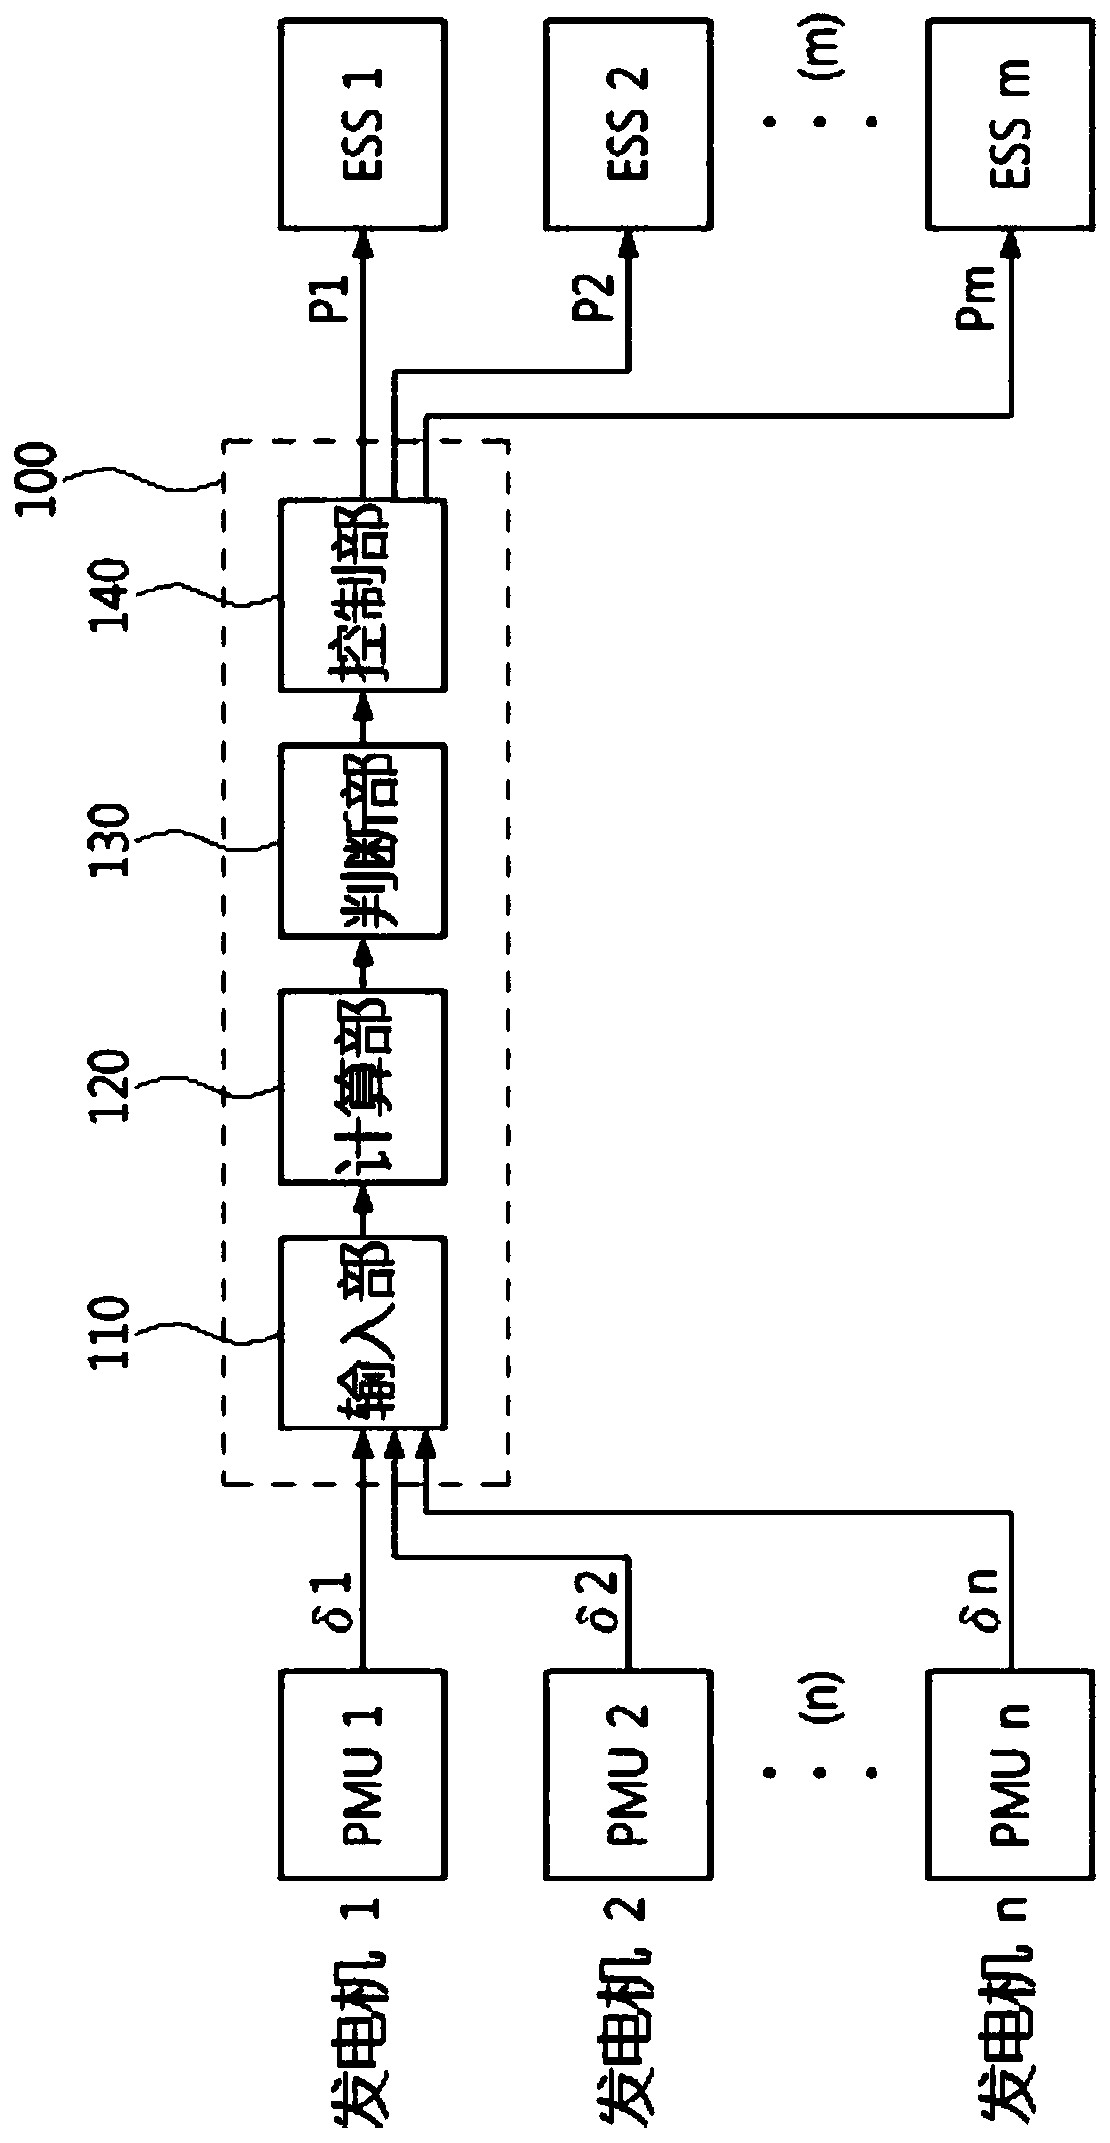 Apparatus for controlling ess according to transient stability state and method thereof